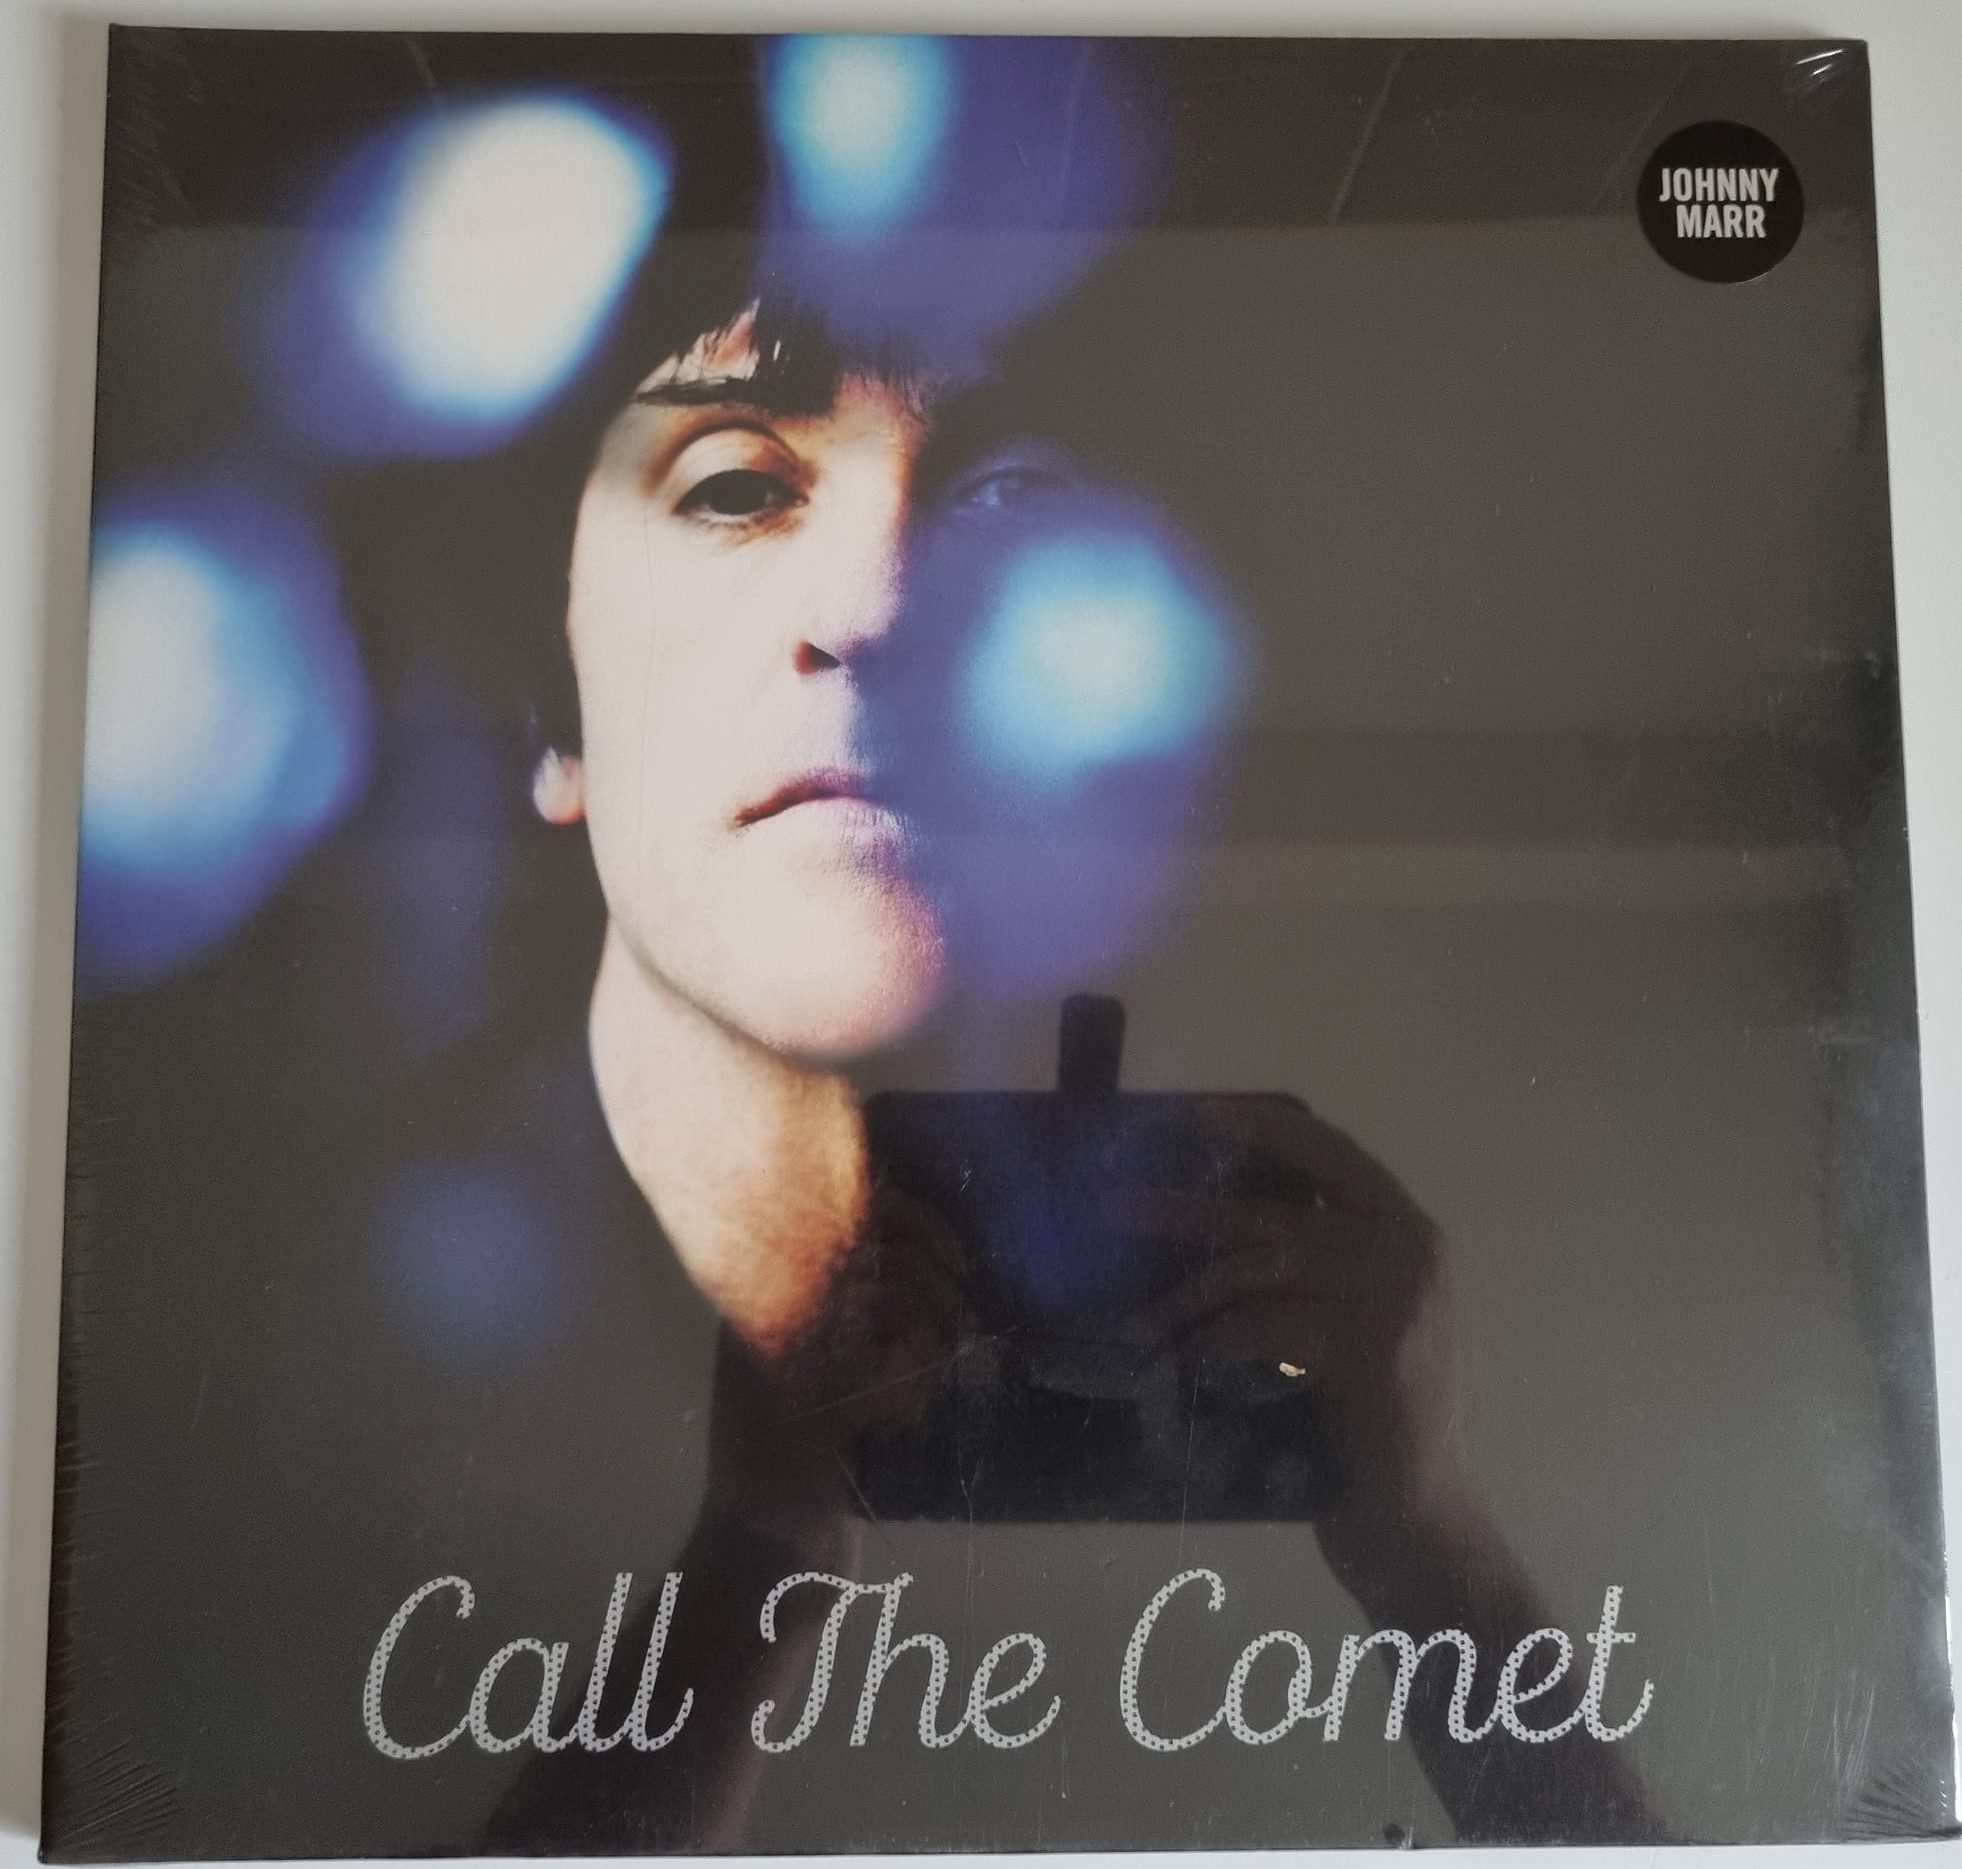 Buy this rare Johnny Marr record by clicking here